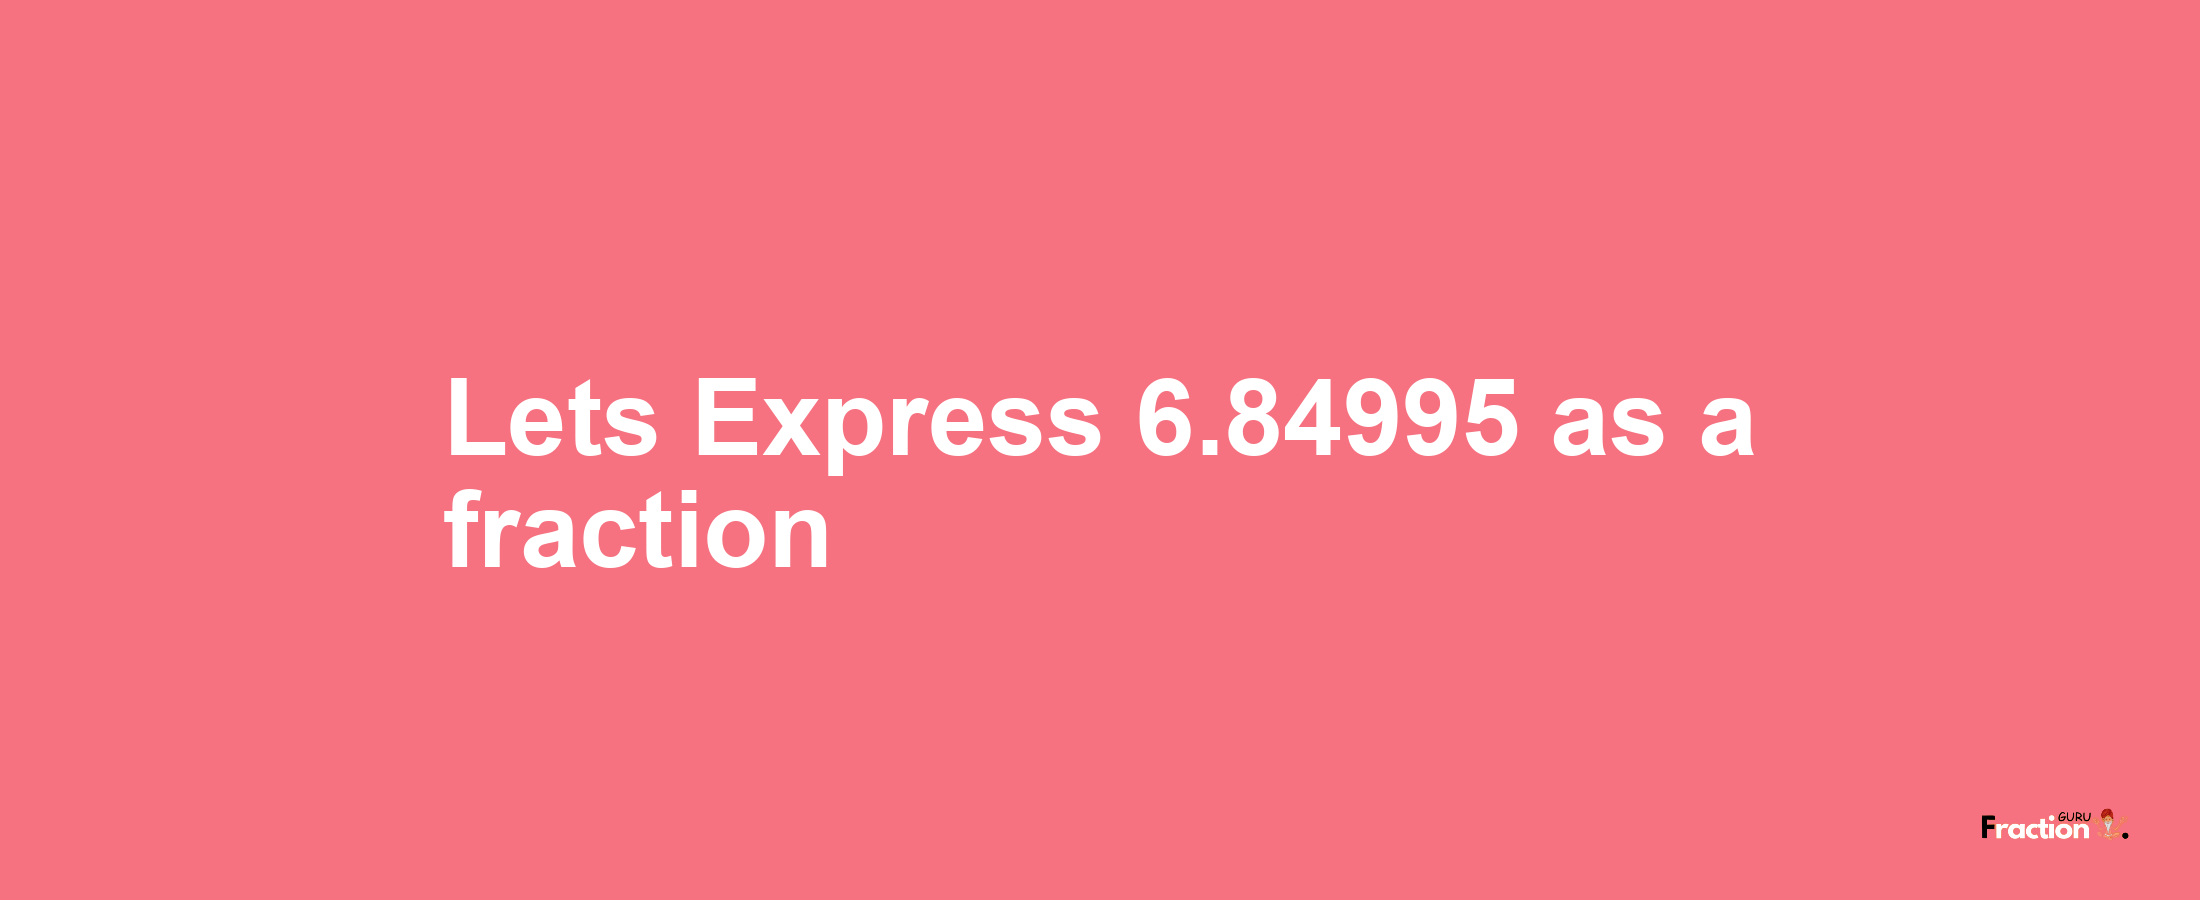 Lets Express 6.84995 as afraction